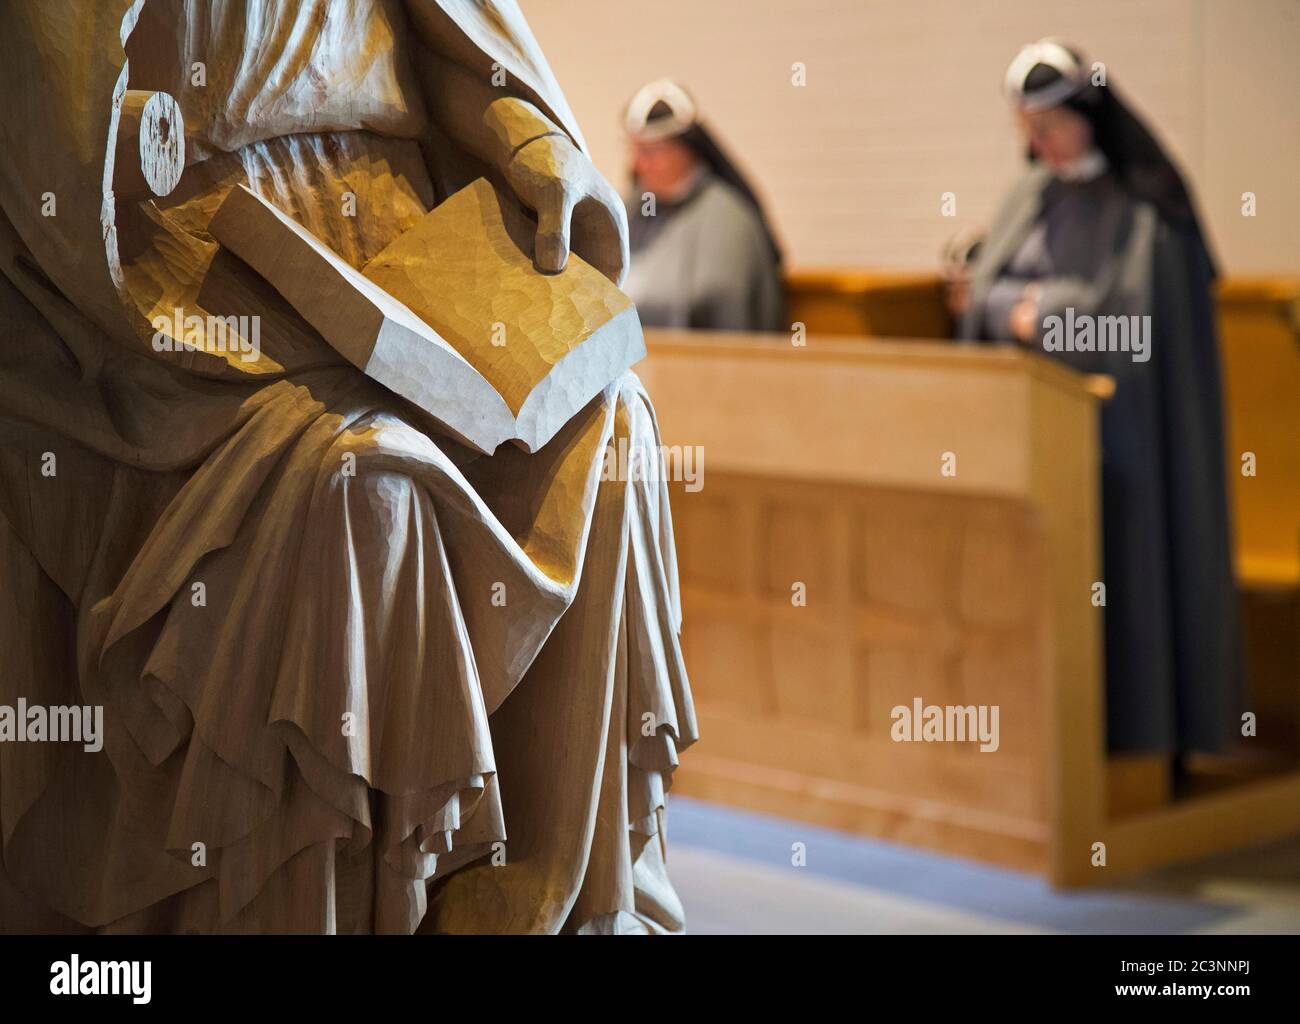 Vadstena, Sweden 20170517 The Birgittine (or Bridgettine) nuns during a prayer in St. Birgitta's Catholic monastery. Completorium is the evening prayer in the tide, the last prayer time of the day before the rest of the night. Photo Jeppe Gustafsson Stock Photo